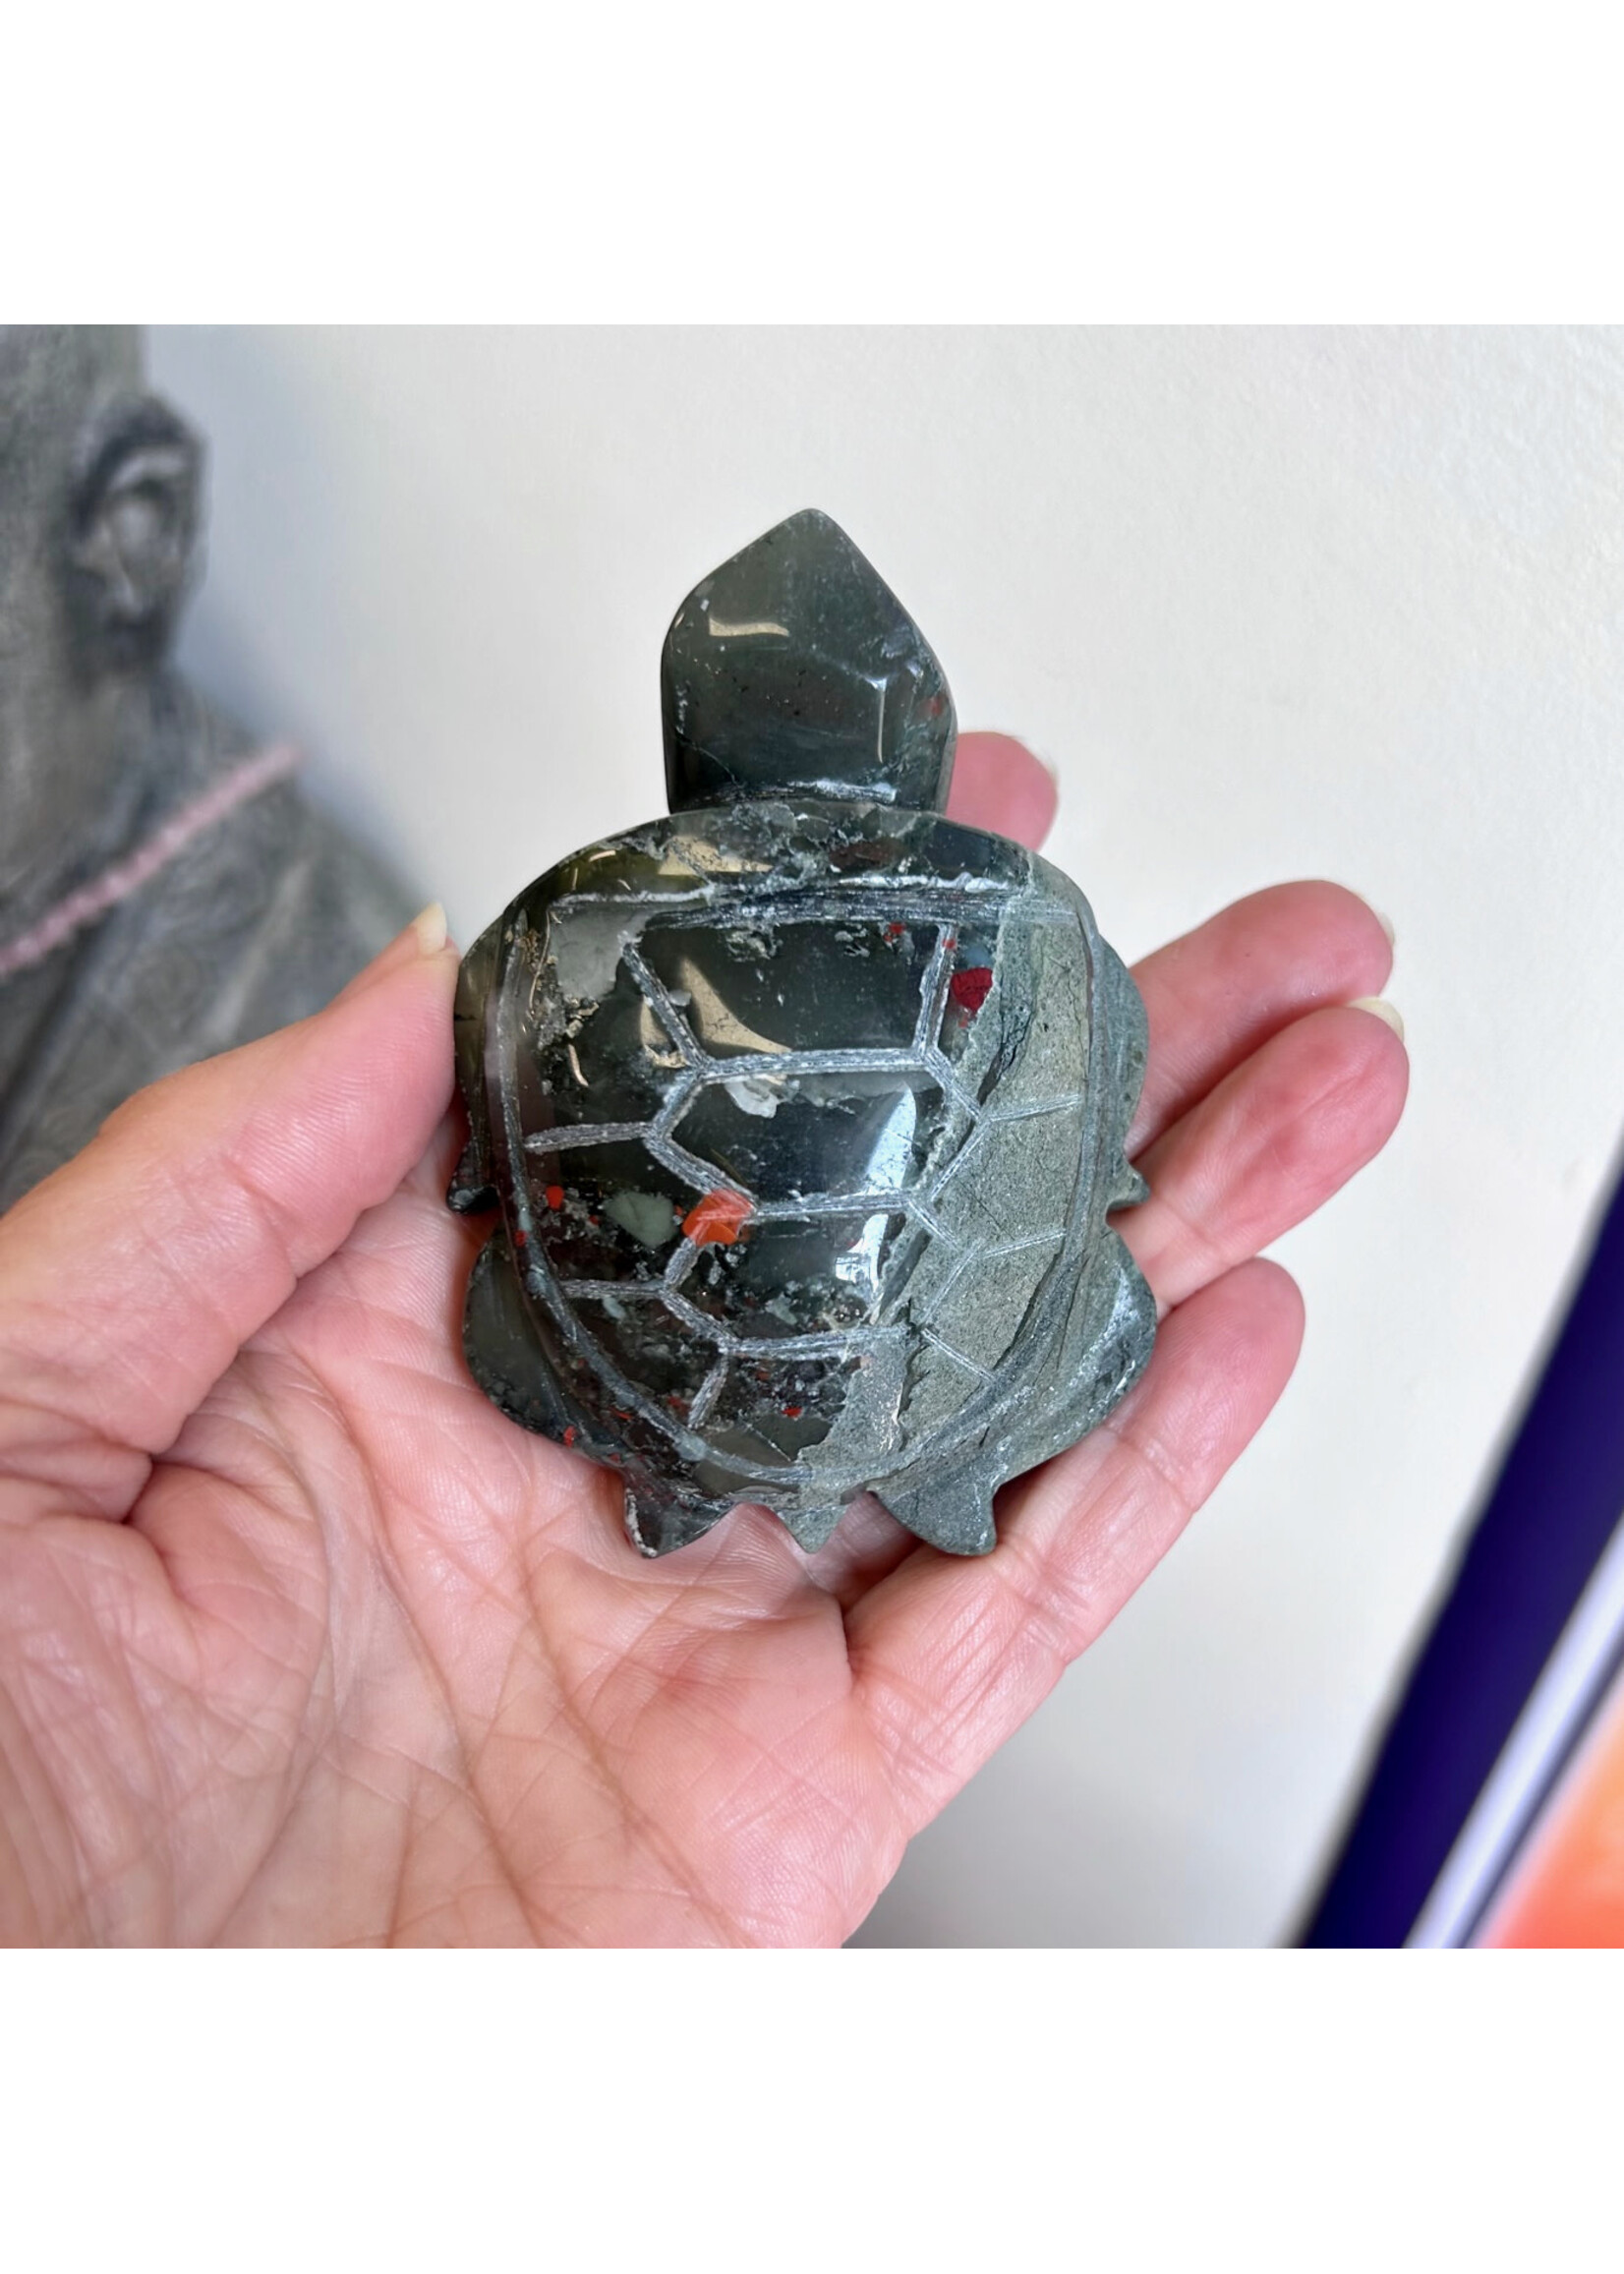 Bloodstone Turtles for good health and happiness